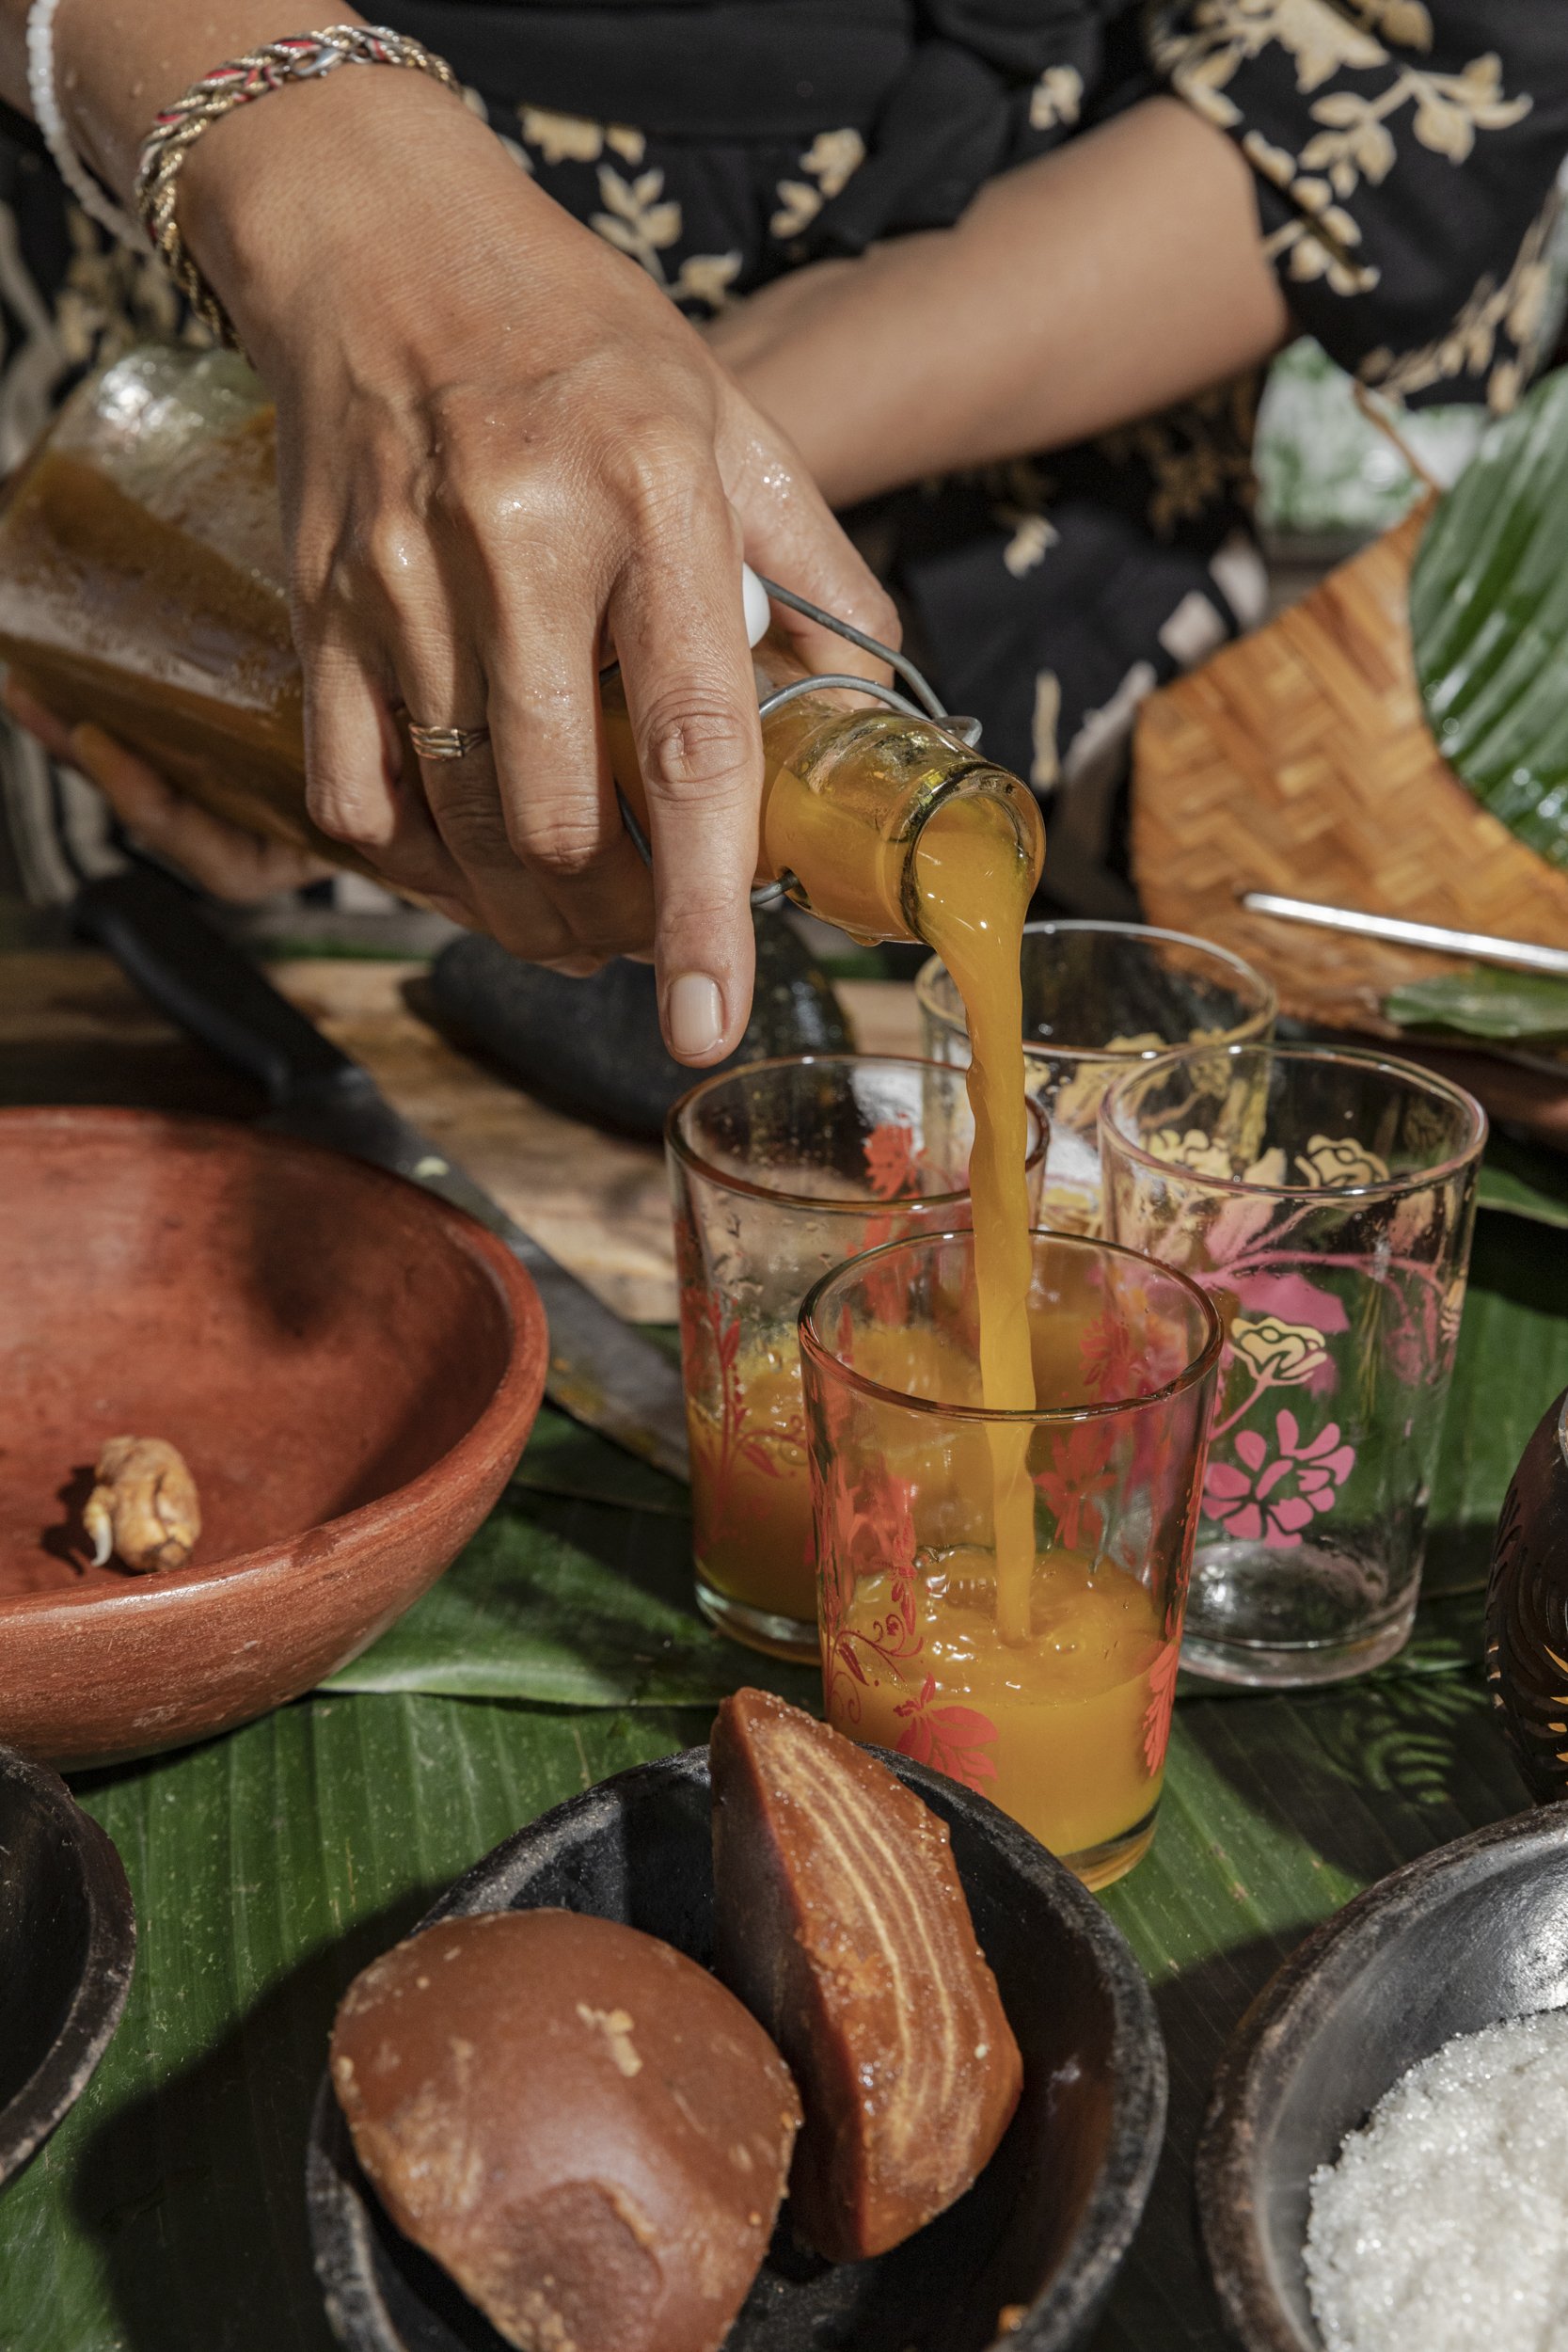  Jamu Kunyit Asam is being poured to try during Jamu making class at Tugu Hotel in Canggu, Bali, Indonesia. 